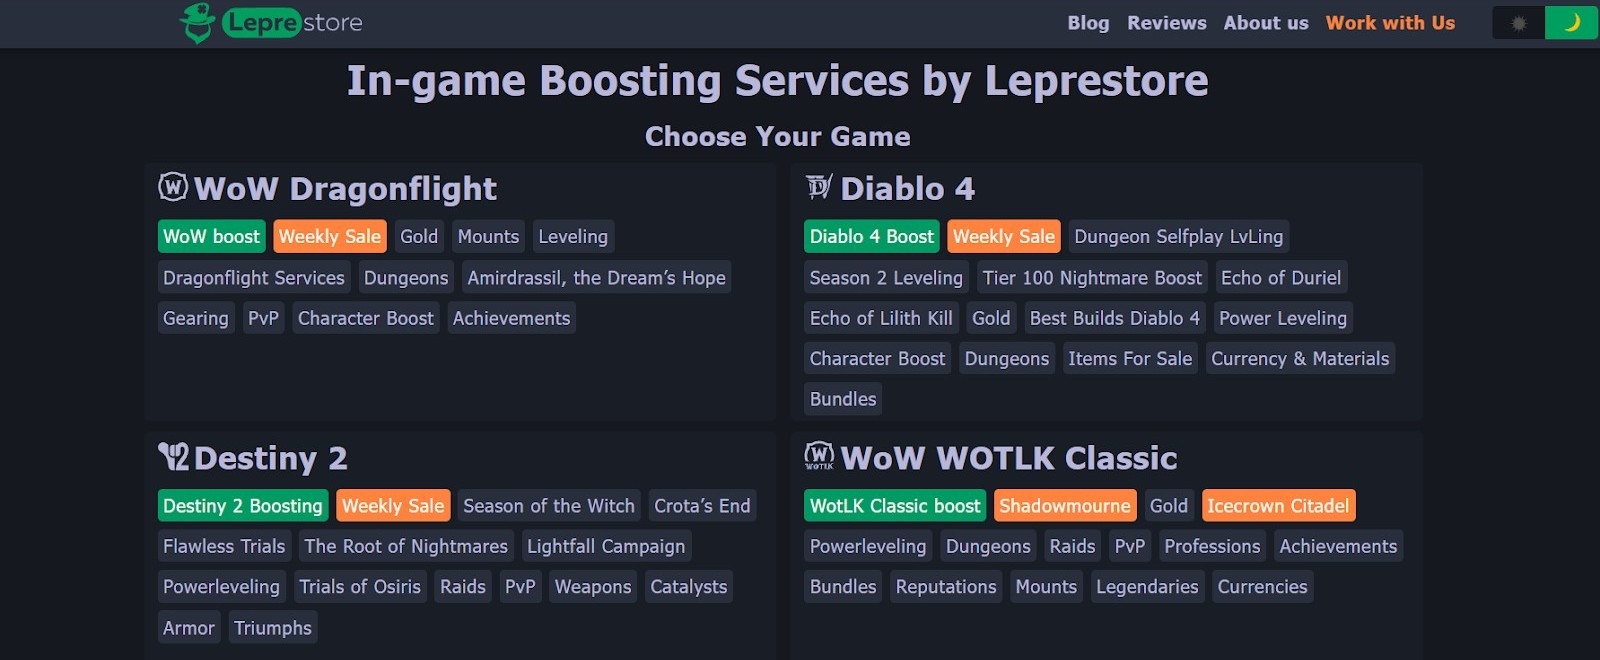 Leprestore.com distinguishes itself with a comprehensive range of WoW raid boosting services